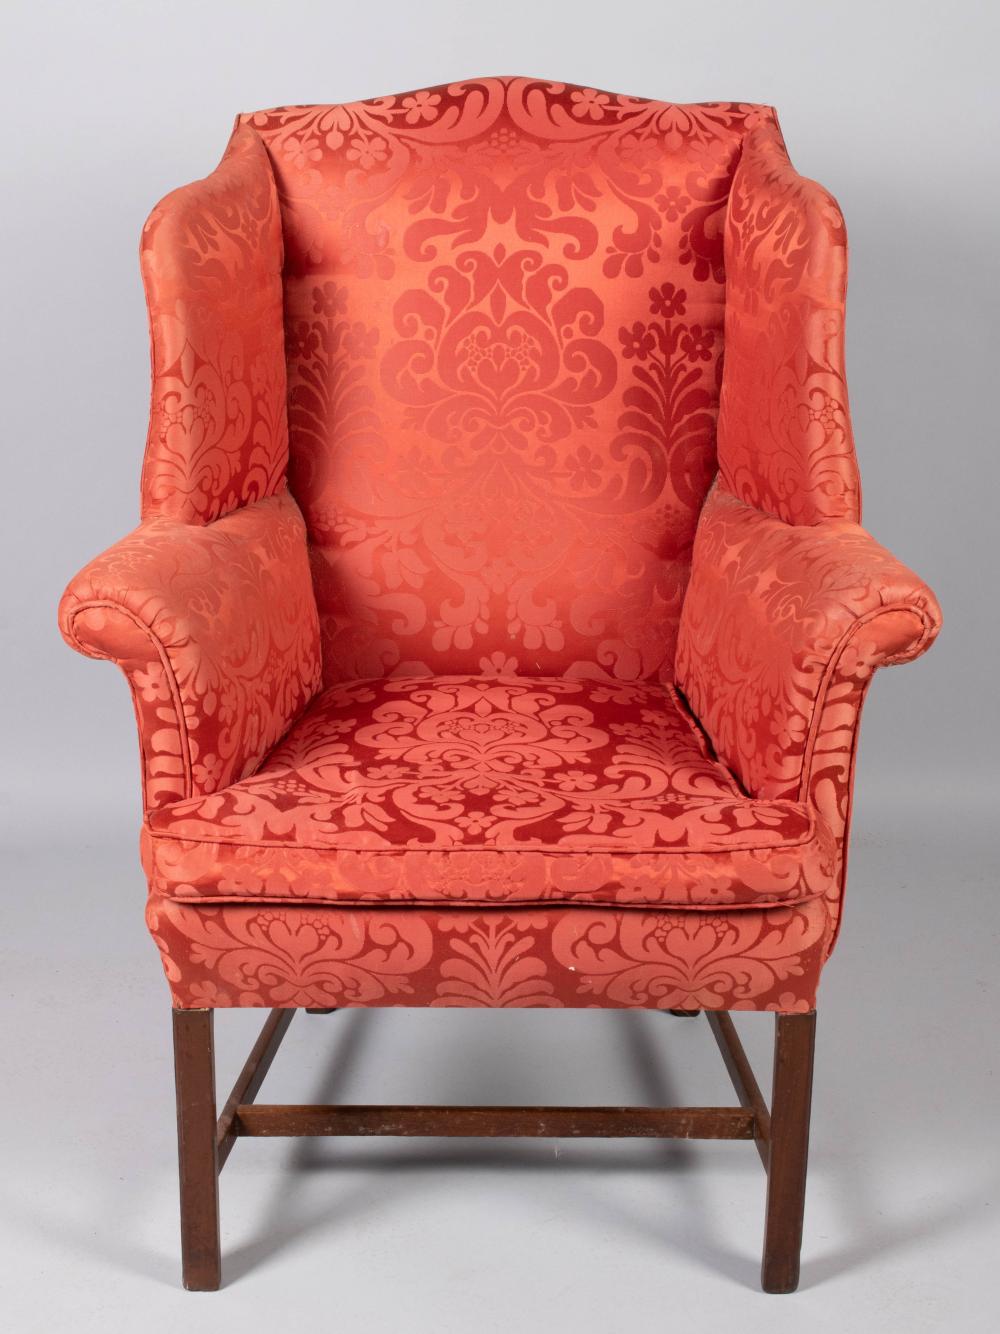 GEORGE III STYLE SMALL WING CHAIR